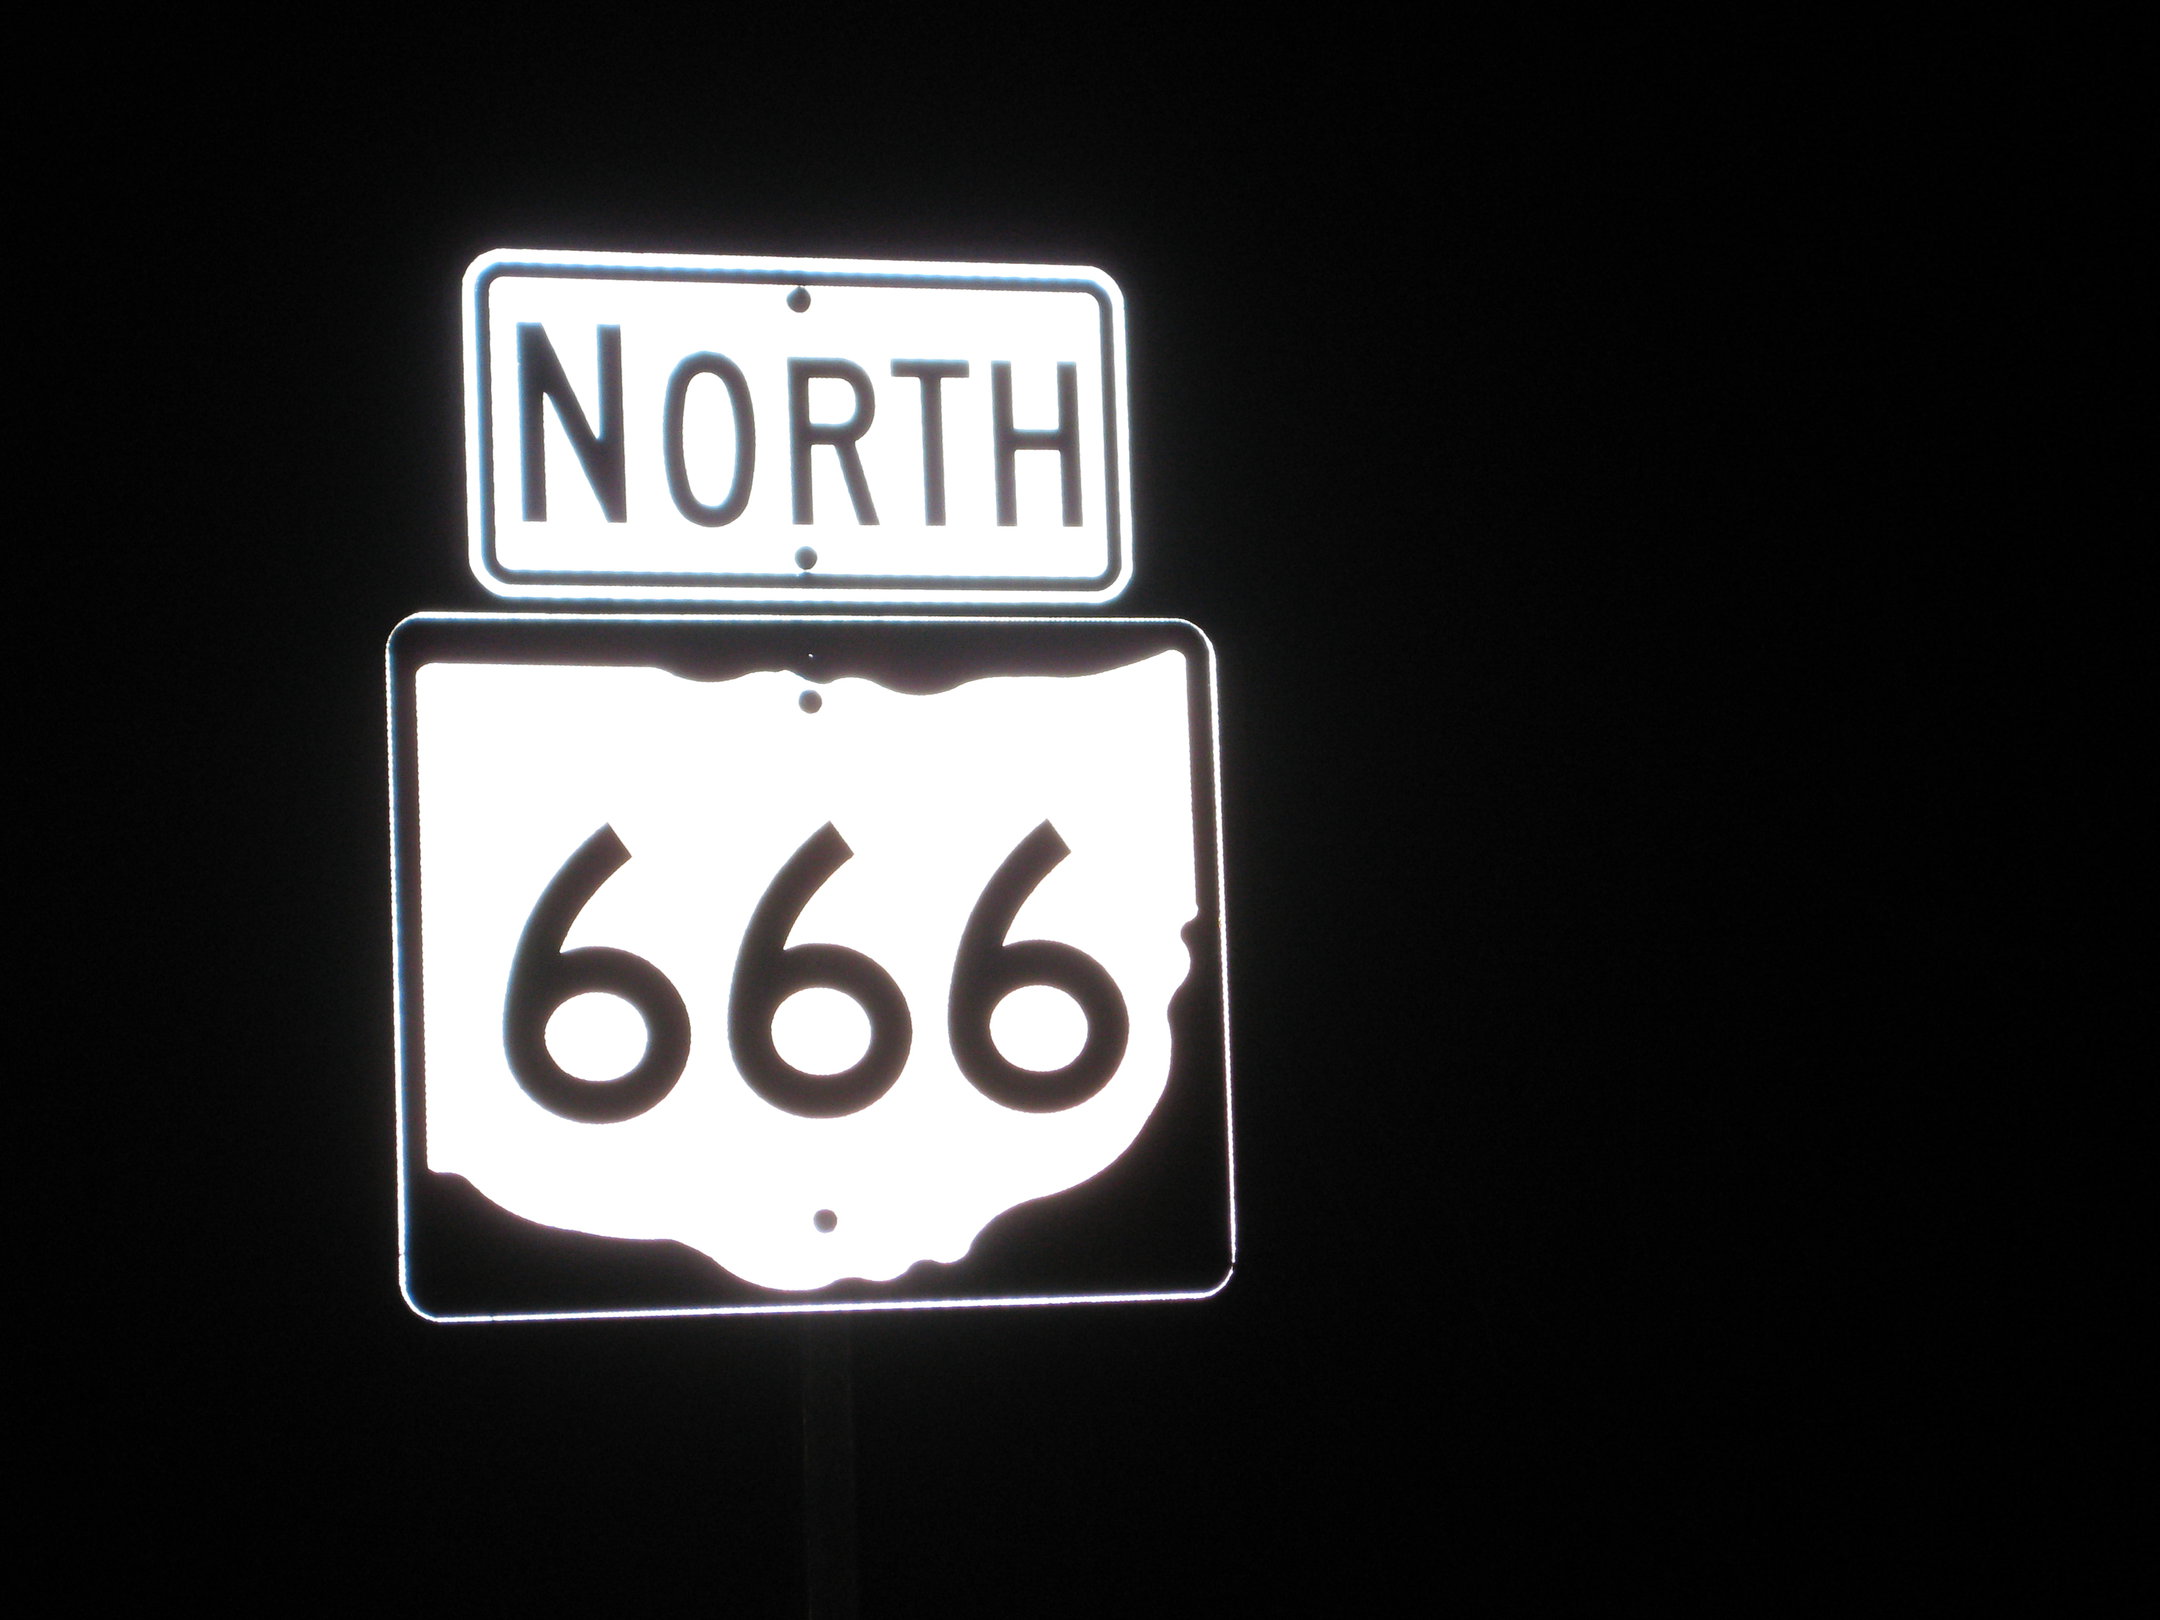 Highway to Hell Ohio Route 666 by shinjiasuka4ever 2160x1620.